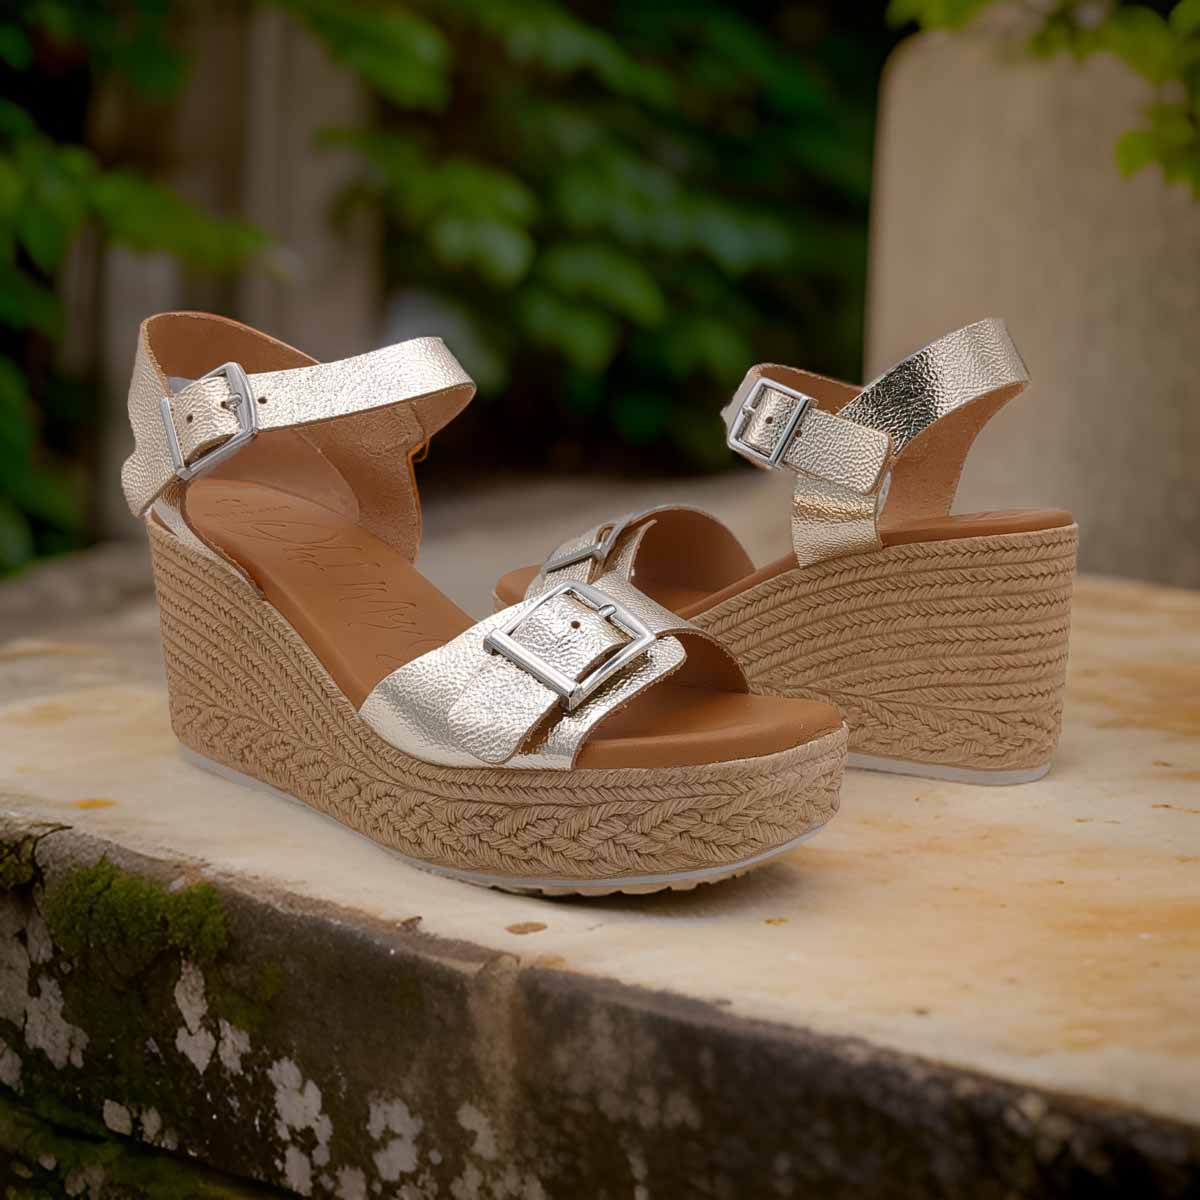 Front view of Oh My Sandals 5459 DUNA CHAMPAN metallic gold wedge.